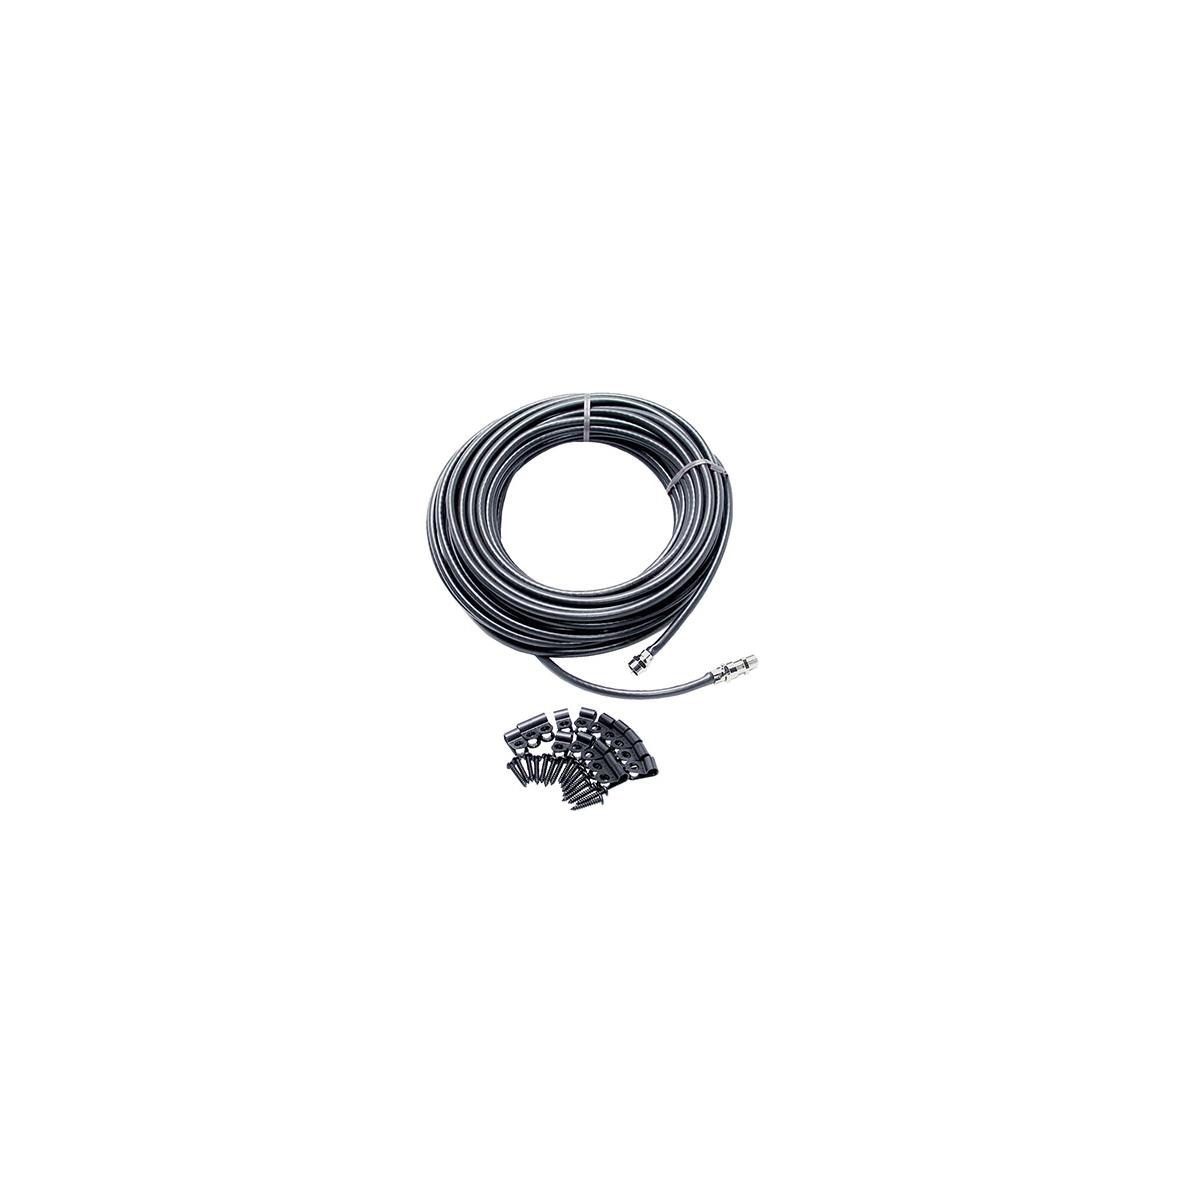 Image of Williams Sound 50' F-Connector RG59 Coaxial Cable with Mounting Hardware